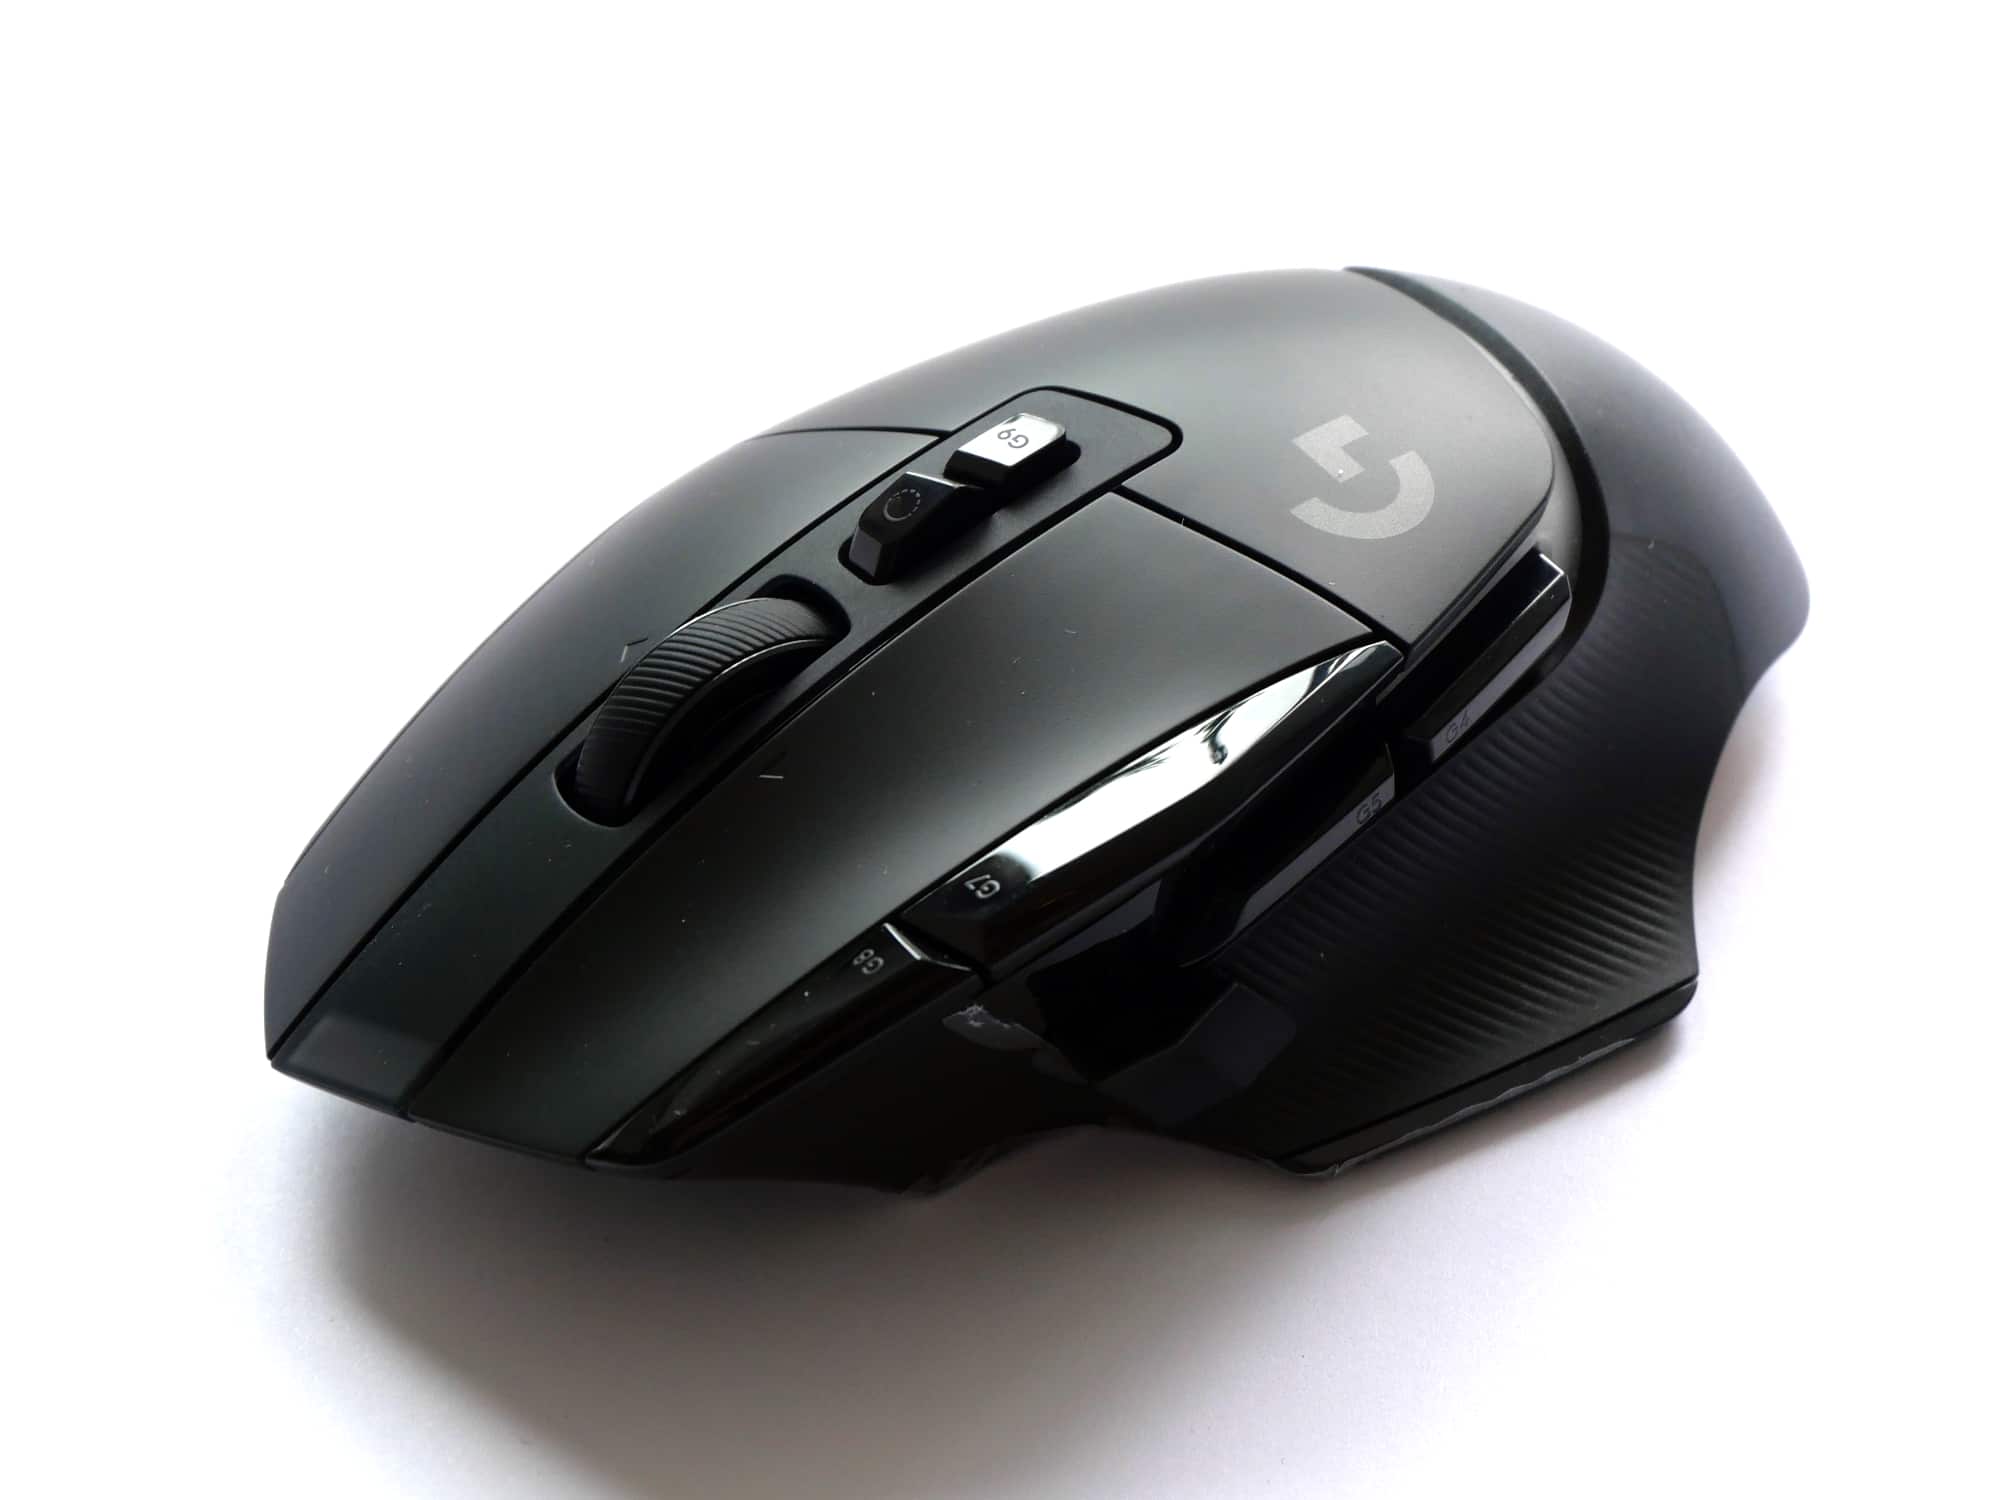 Logitech G502 X Plus gaming mouse review: Potential contenders